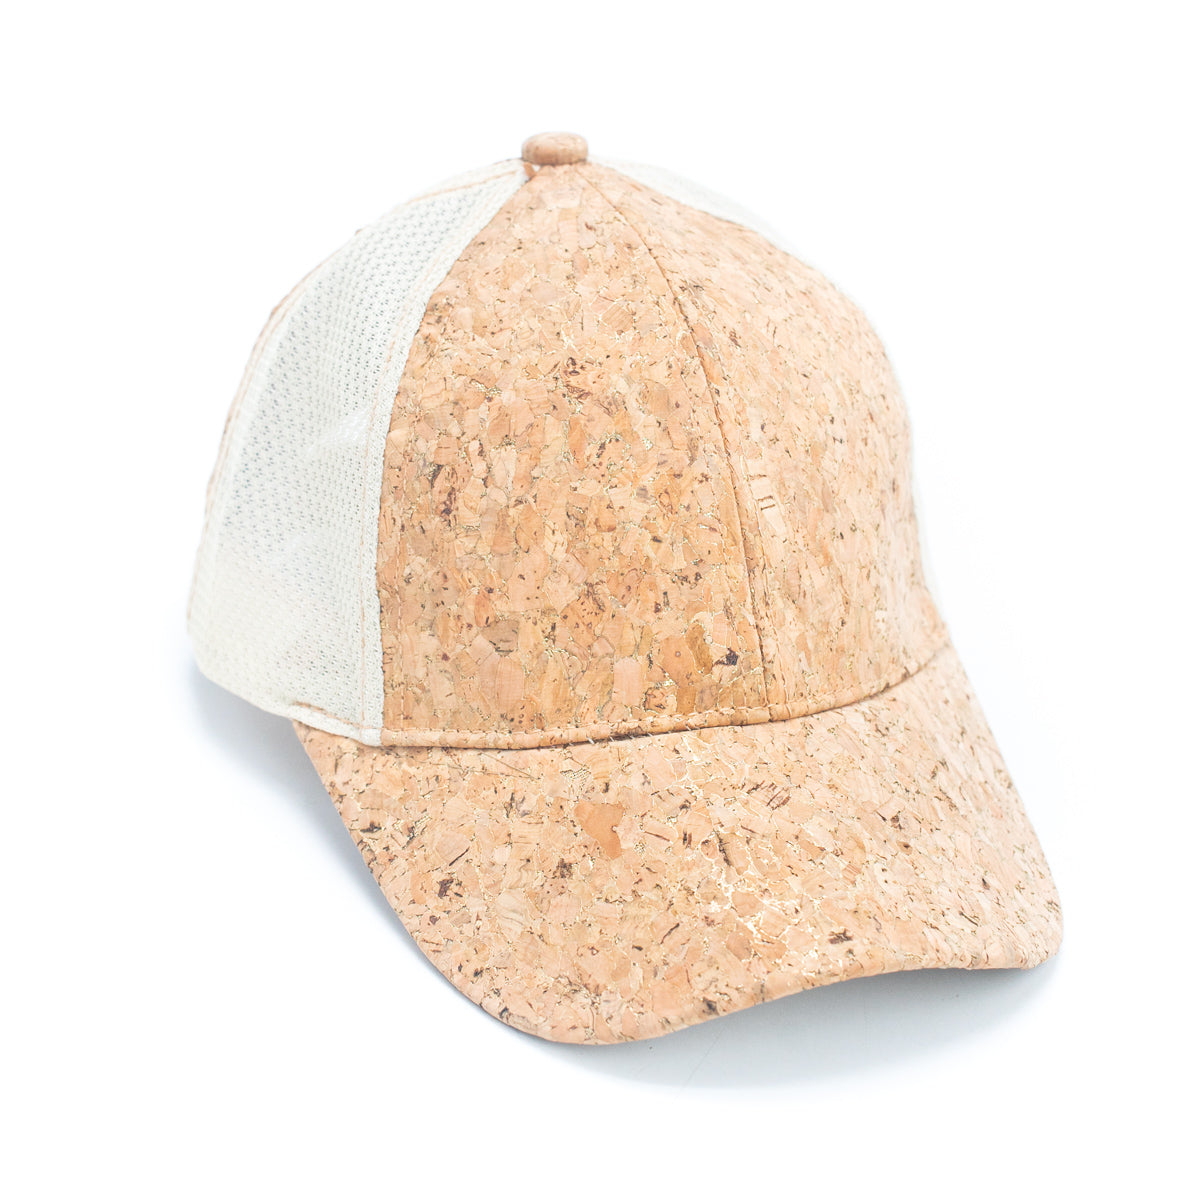 Cork Baseball Cap with Breathable Mesh L-913 | THE CORK COLLECTION